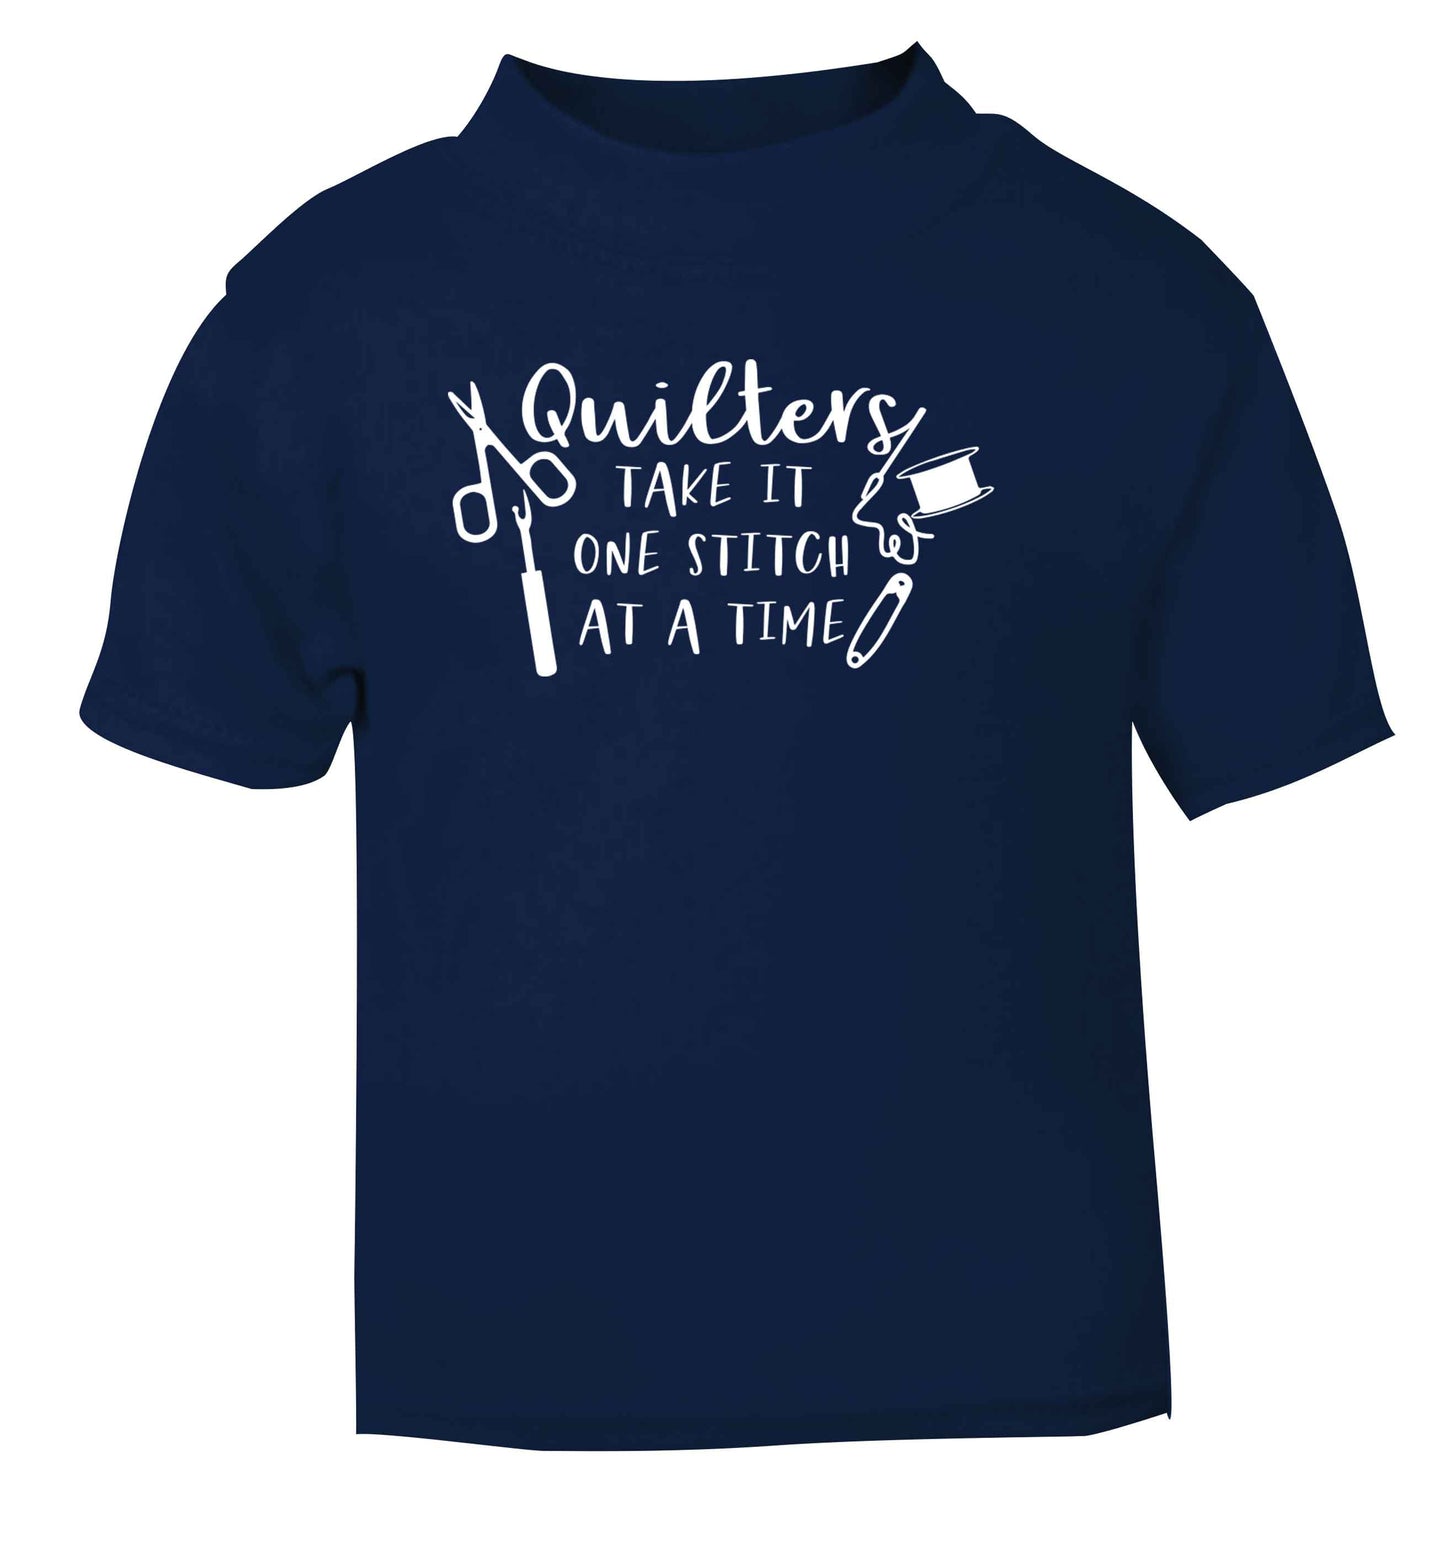 Quilters take it one stitch at a time  navy Baby Toddler Tshirt 2 Years